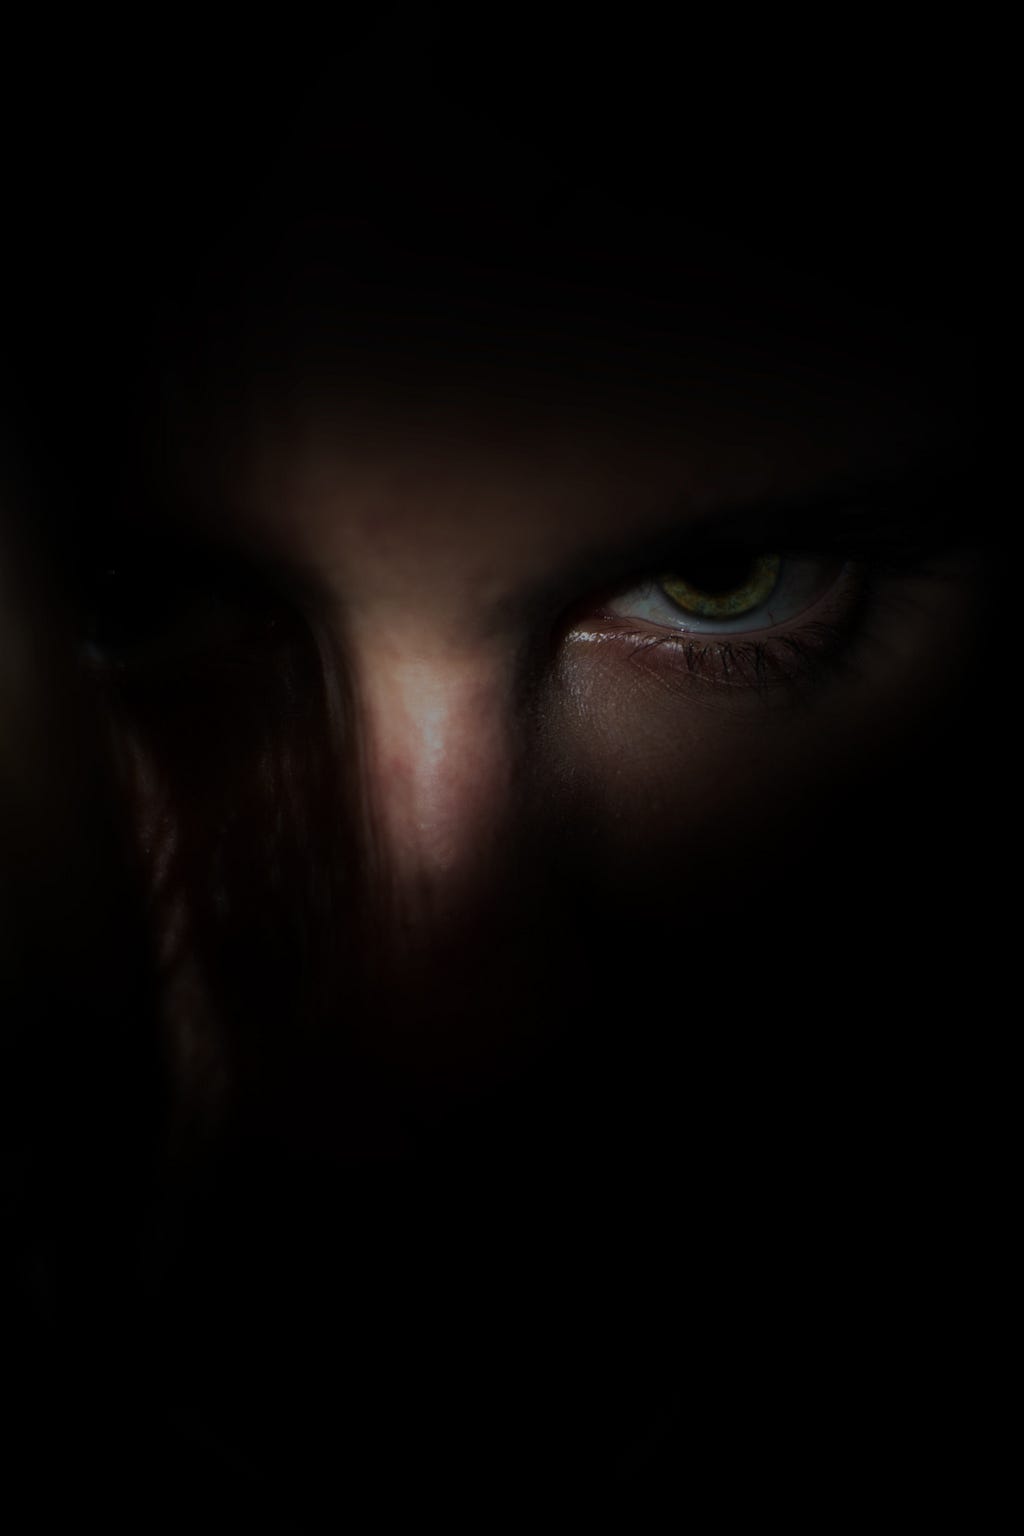 A man in darkness trying to find some light, whose eyes are evident in the dark.